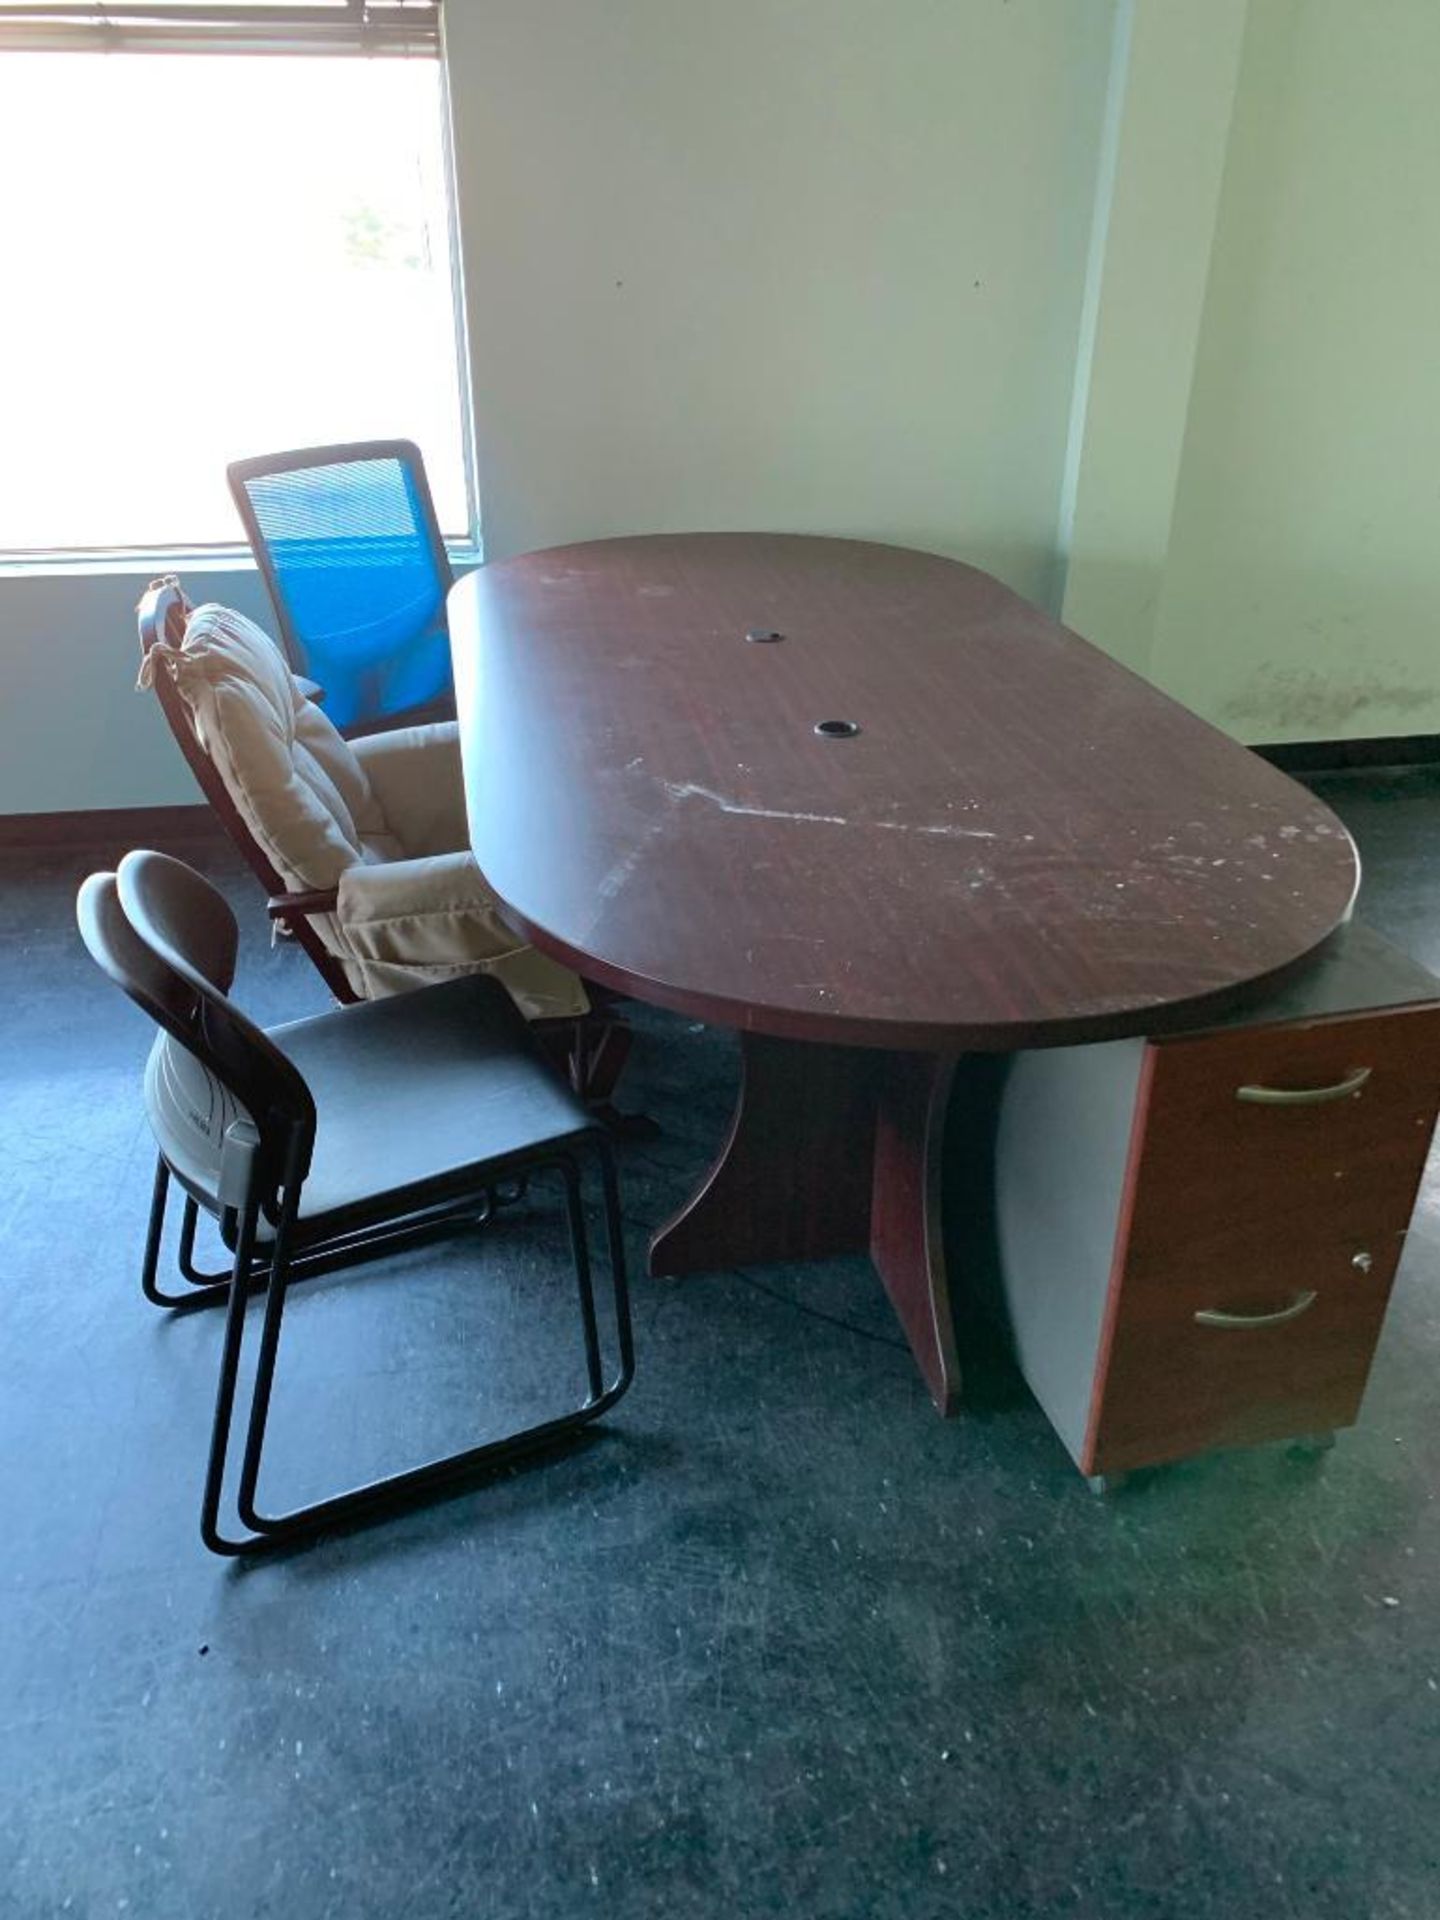 U-SHAPED DESK UNIT, SMALL CONFERENCE TABLE - Image 2 of 3